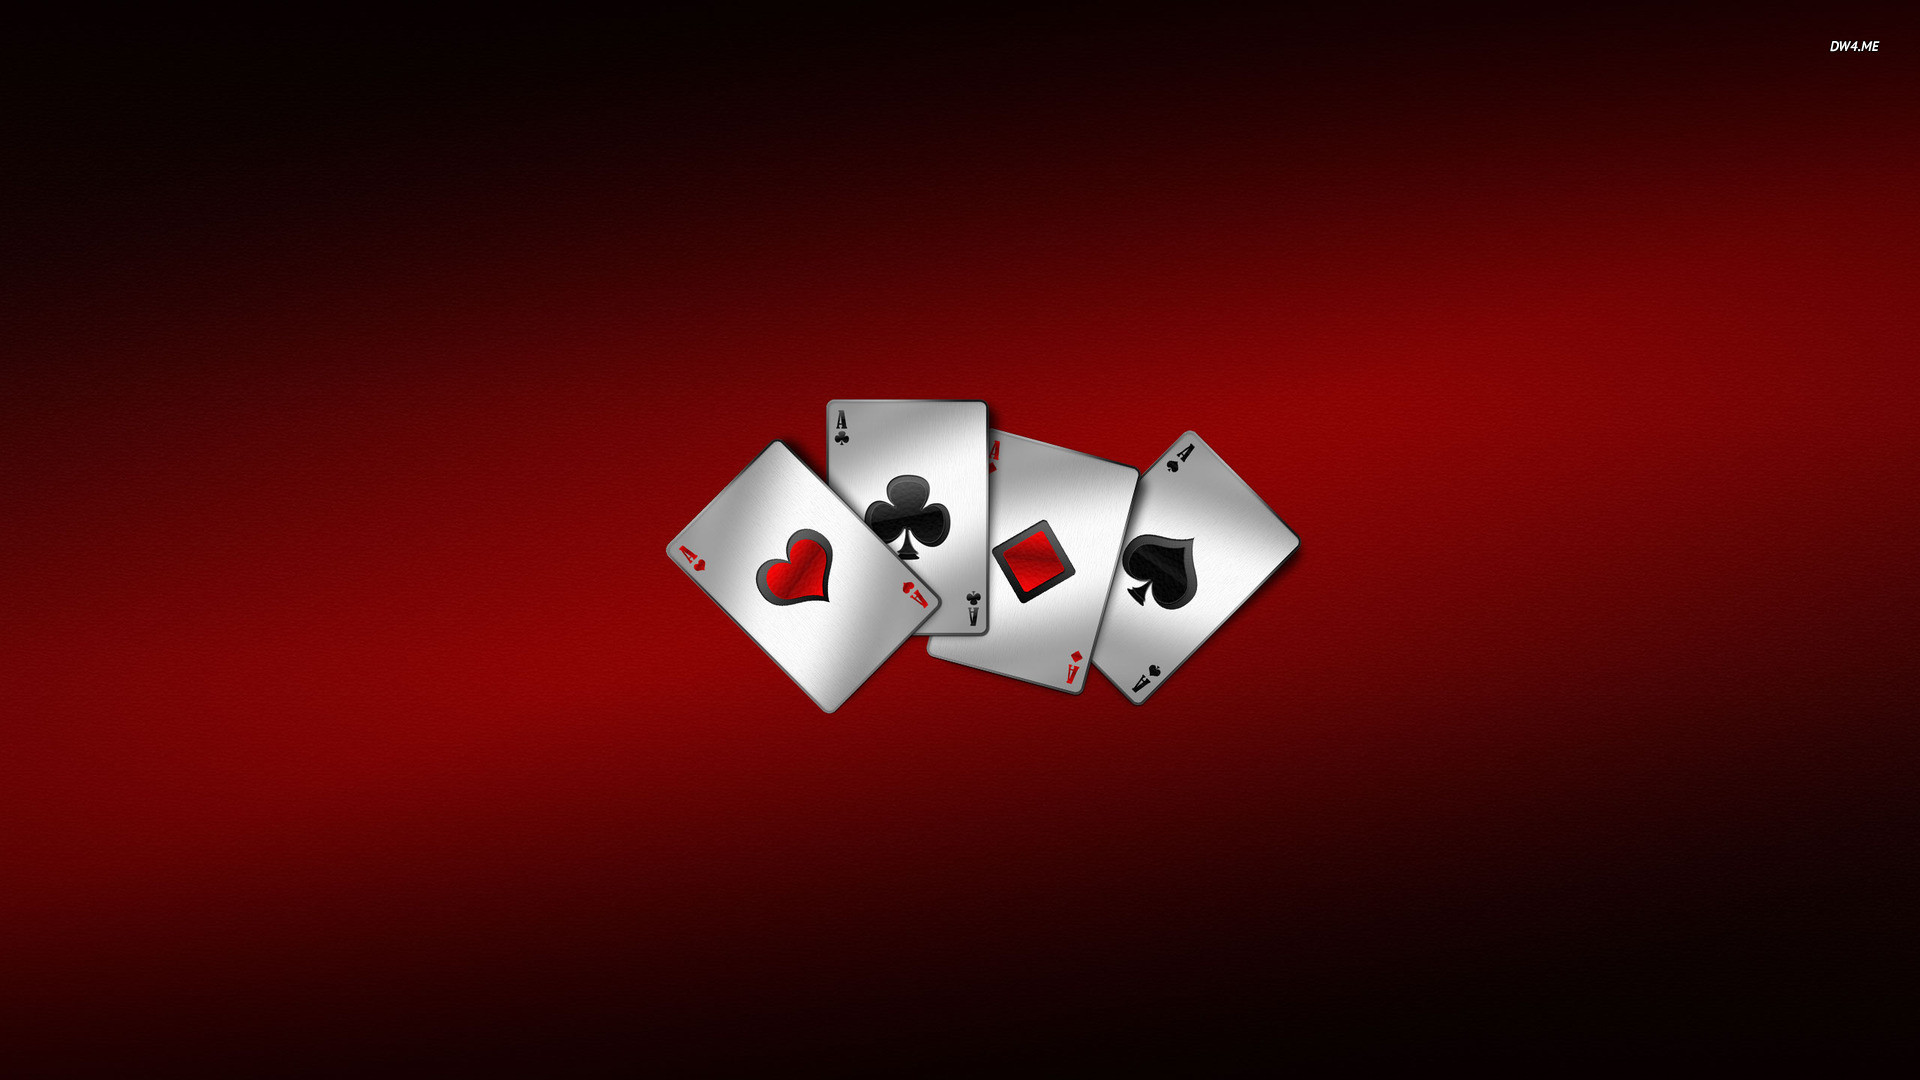 1920x1080 PreviousNext. Previous Image Next Image. playing cards ...